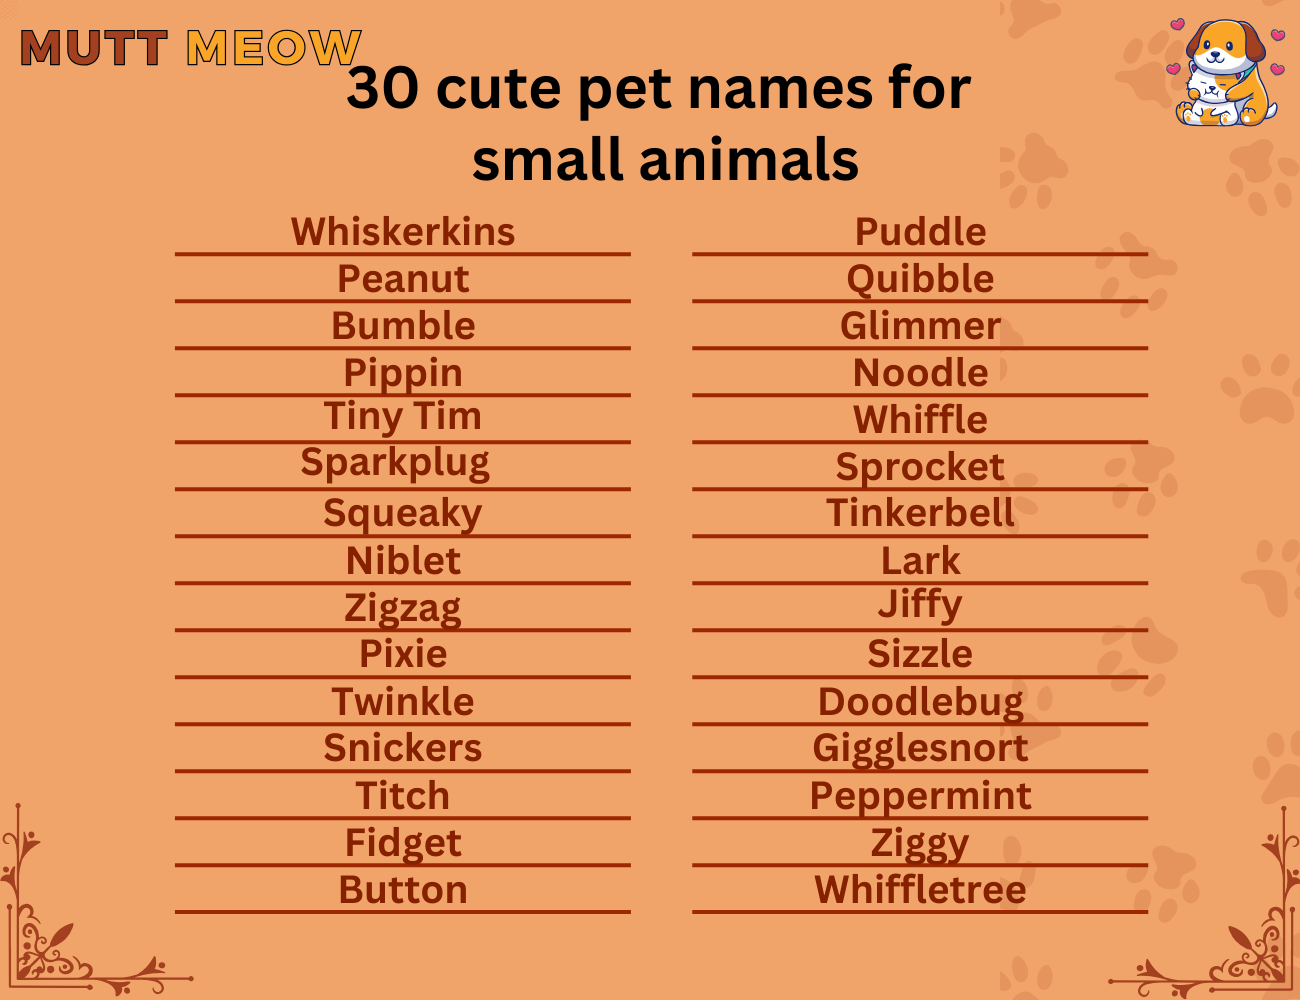 30 cute pet names for small animals